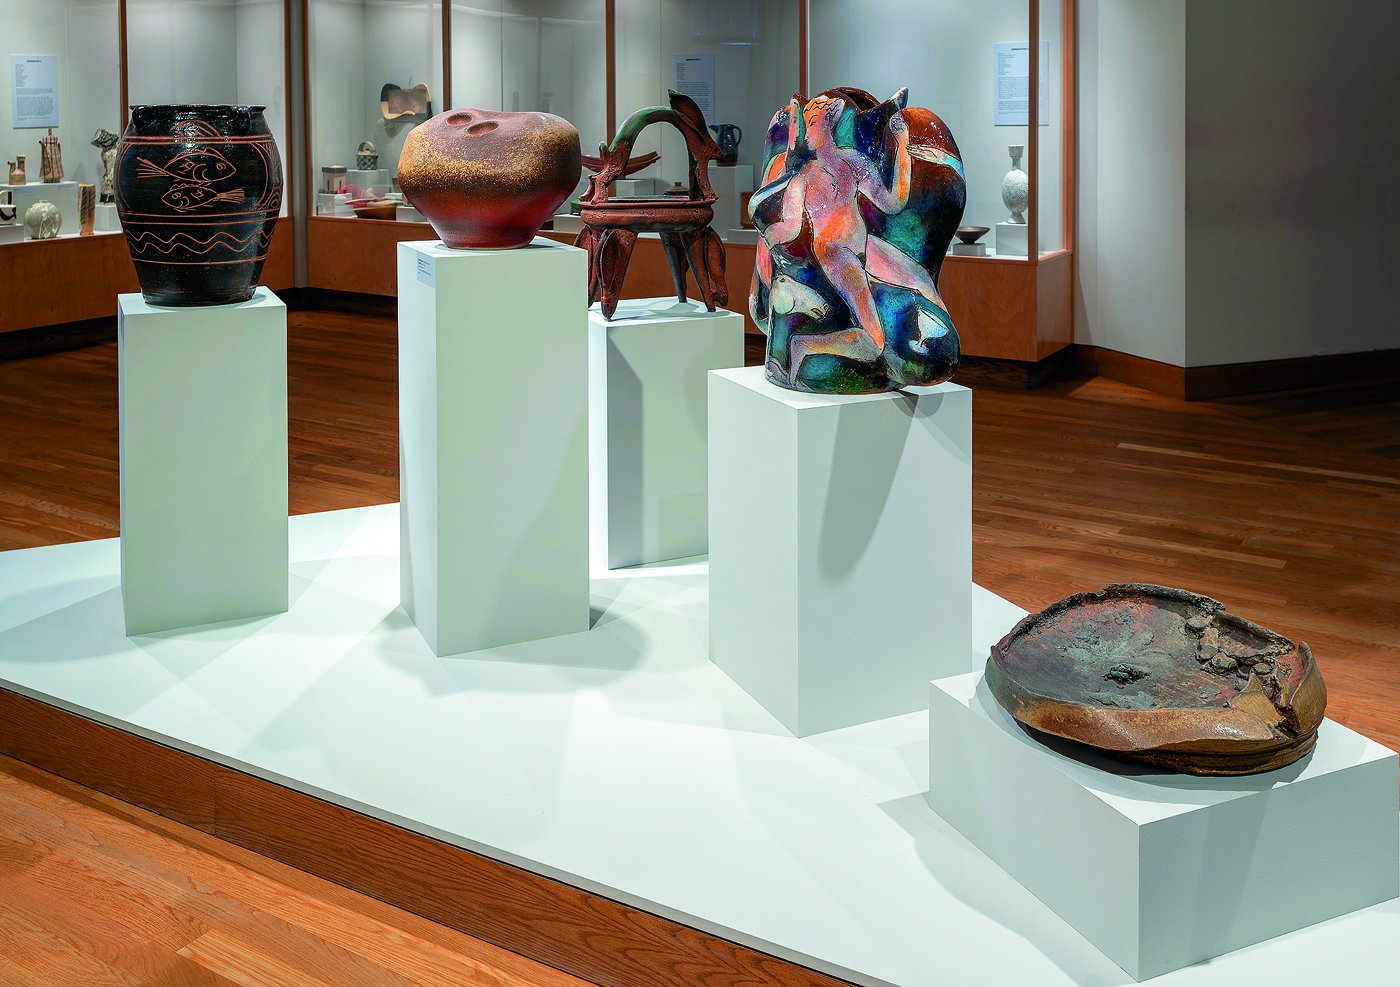 A view of 5 ceramic sculptures on display at the Weisman Art Museum. 